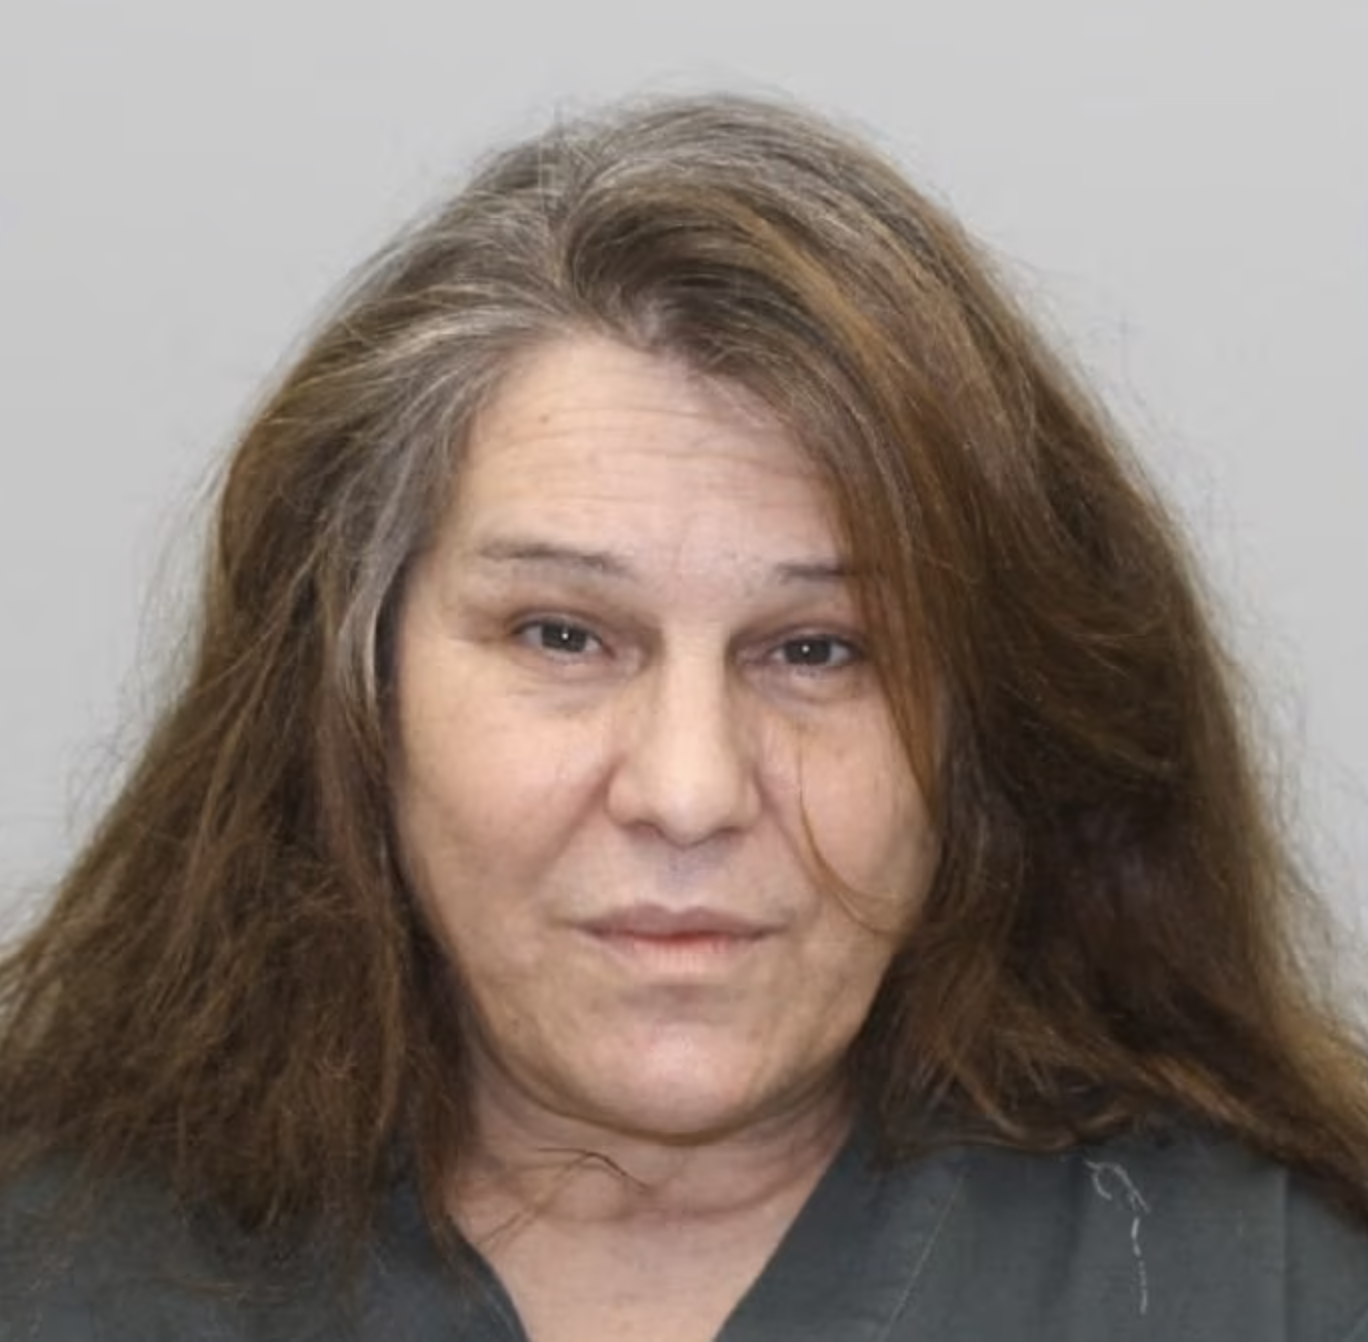 Woman convicted of first degree reckless homicide, drug trafficking charges in relation to Ripon overdose News riponpress pic